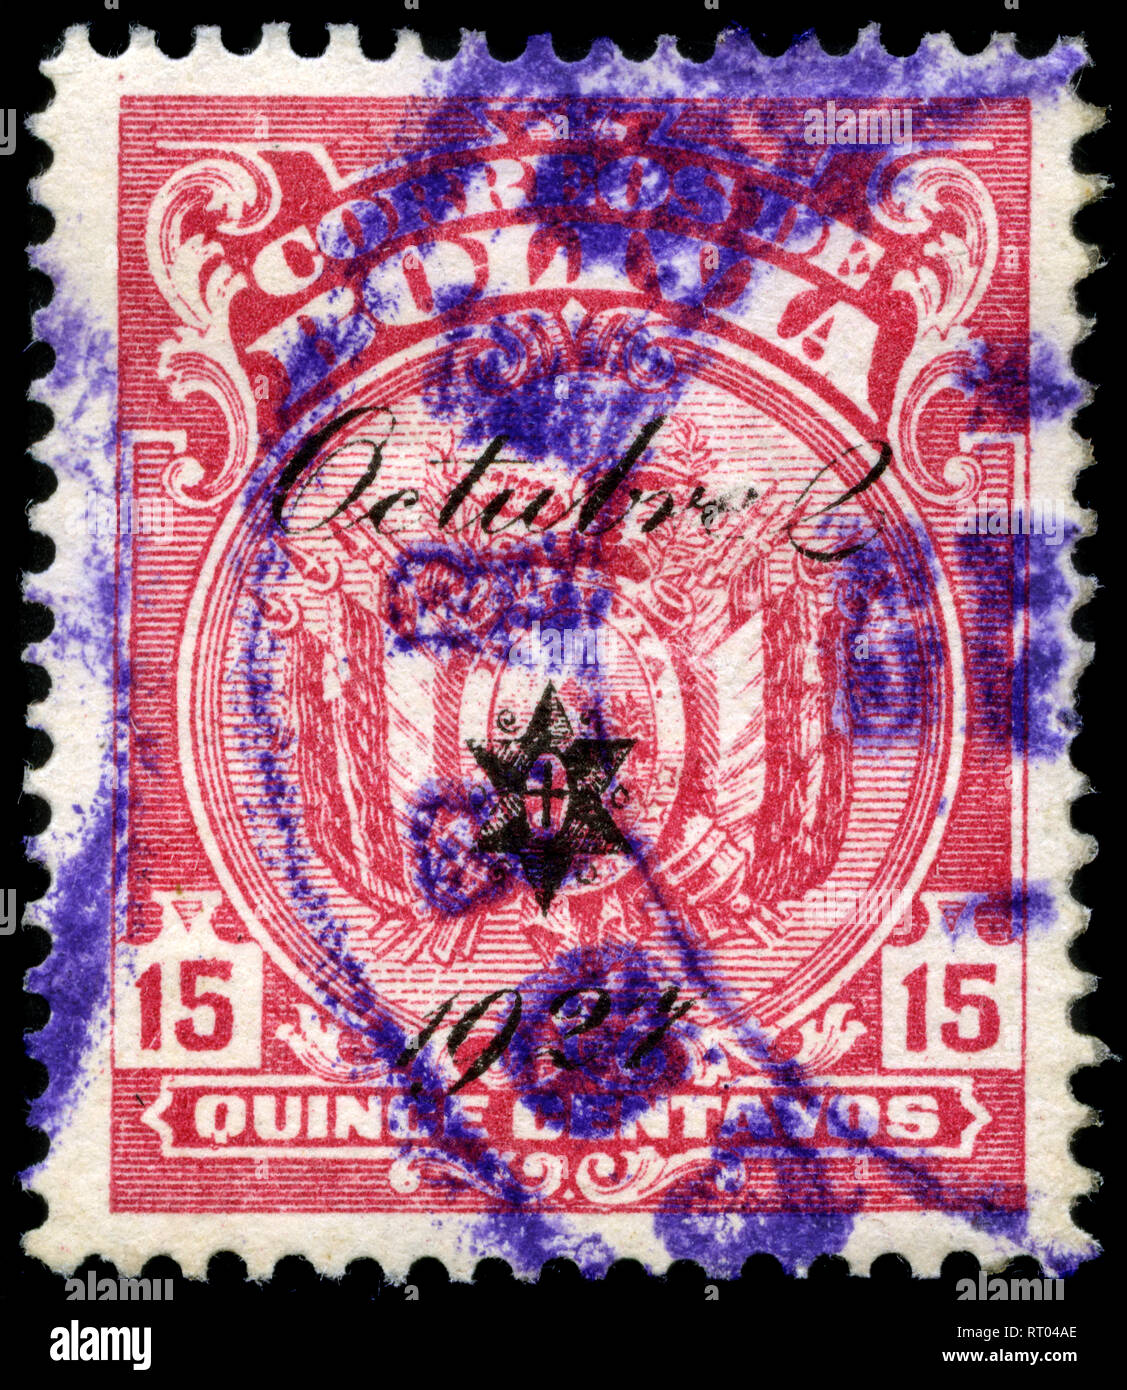 Postage stamp from Bolivia in the Definitive series issued in 1928 Stock Photo